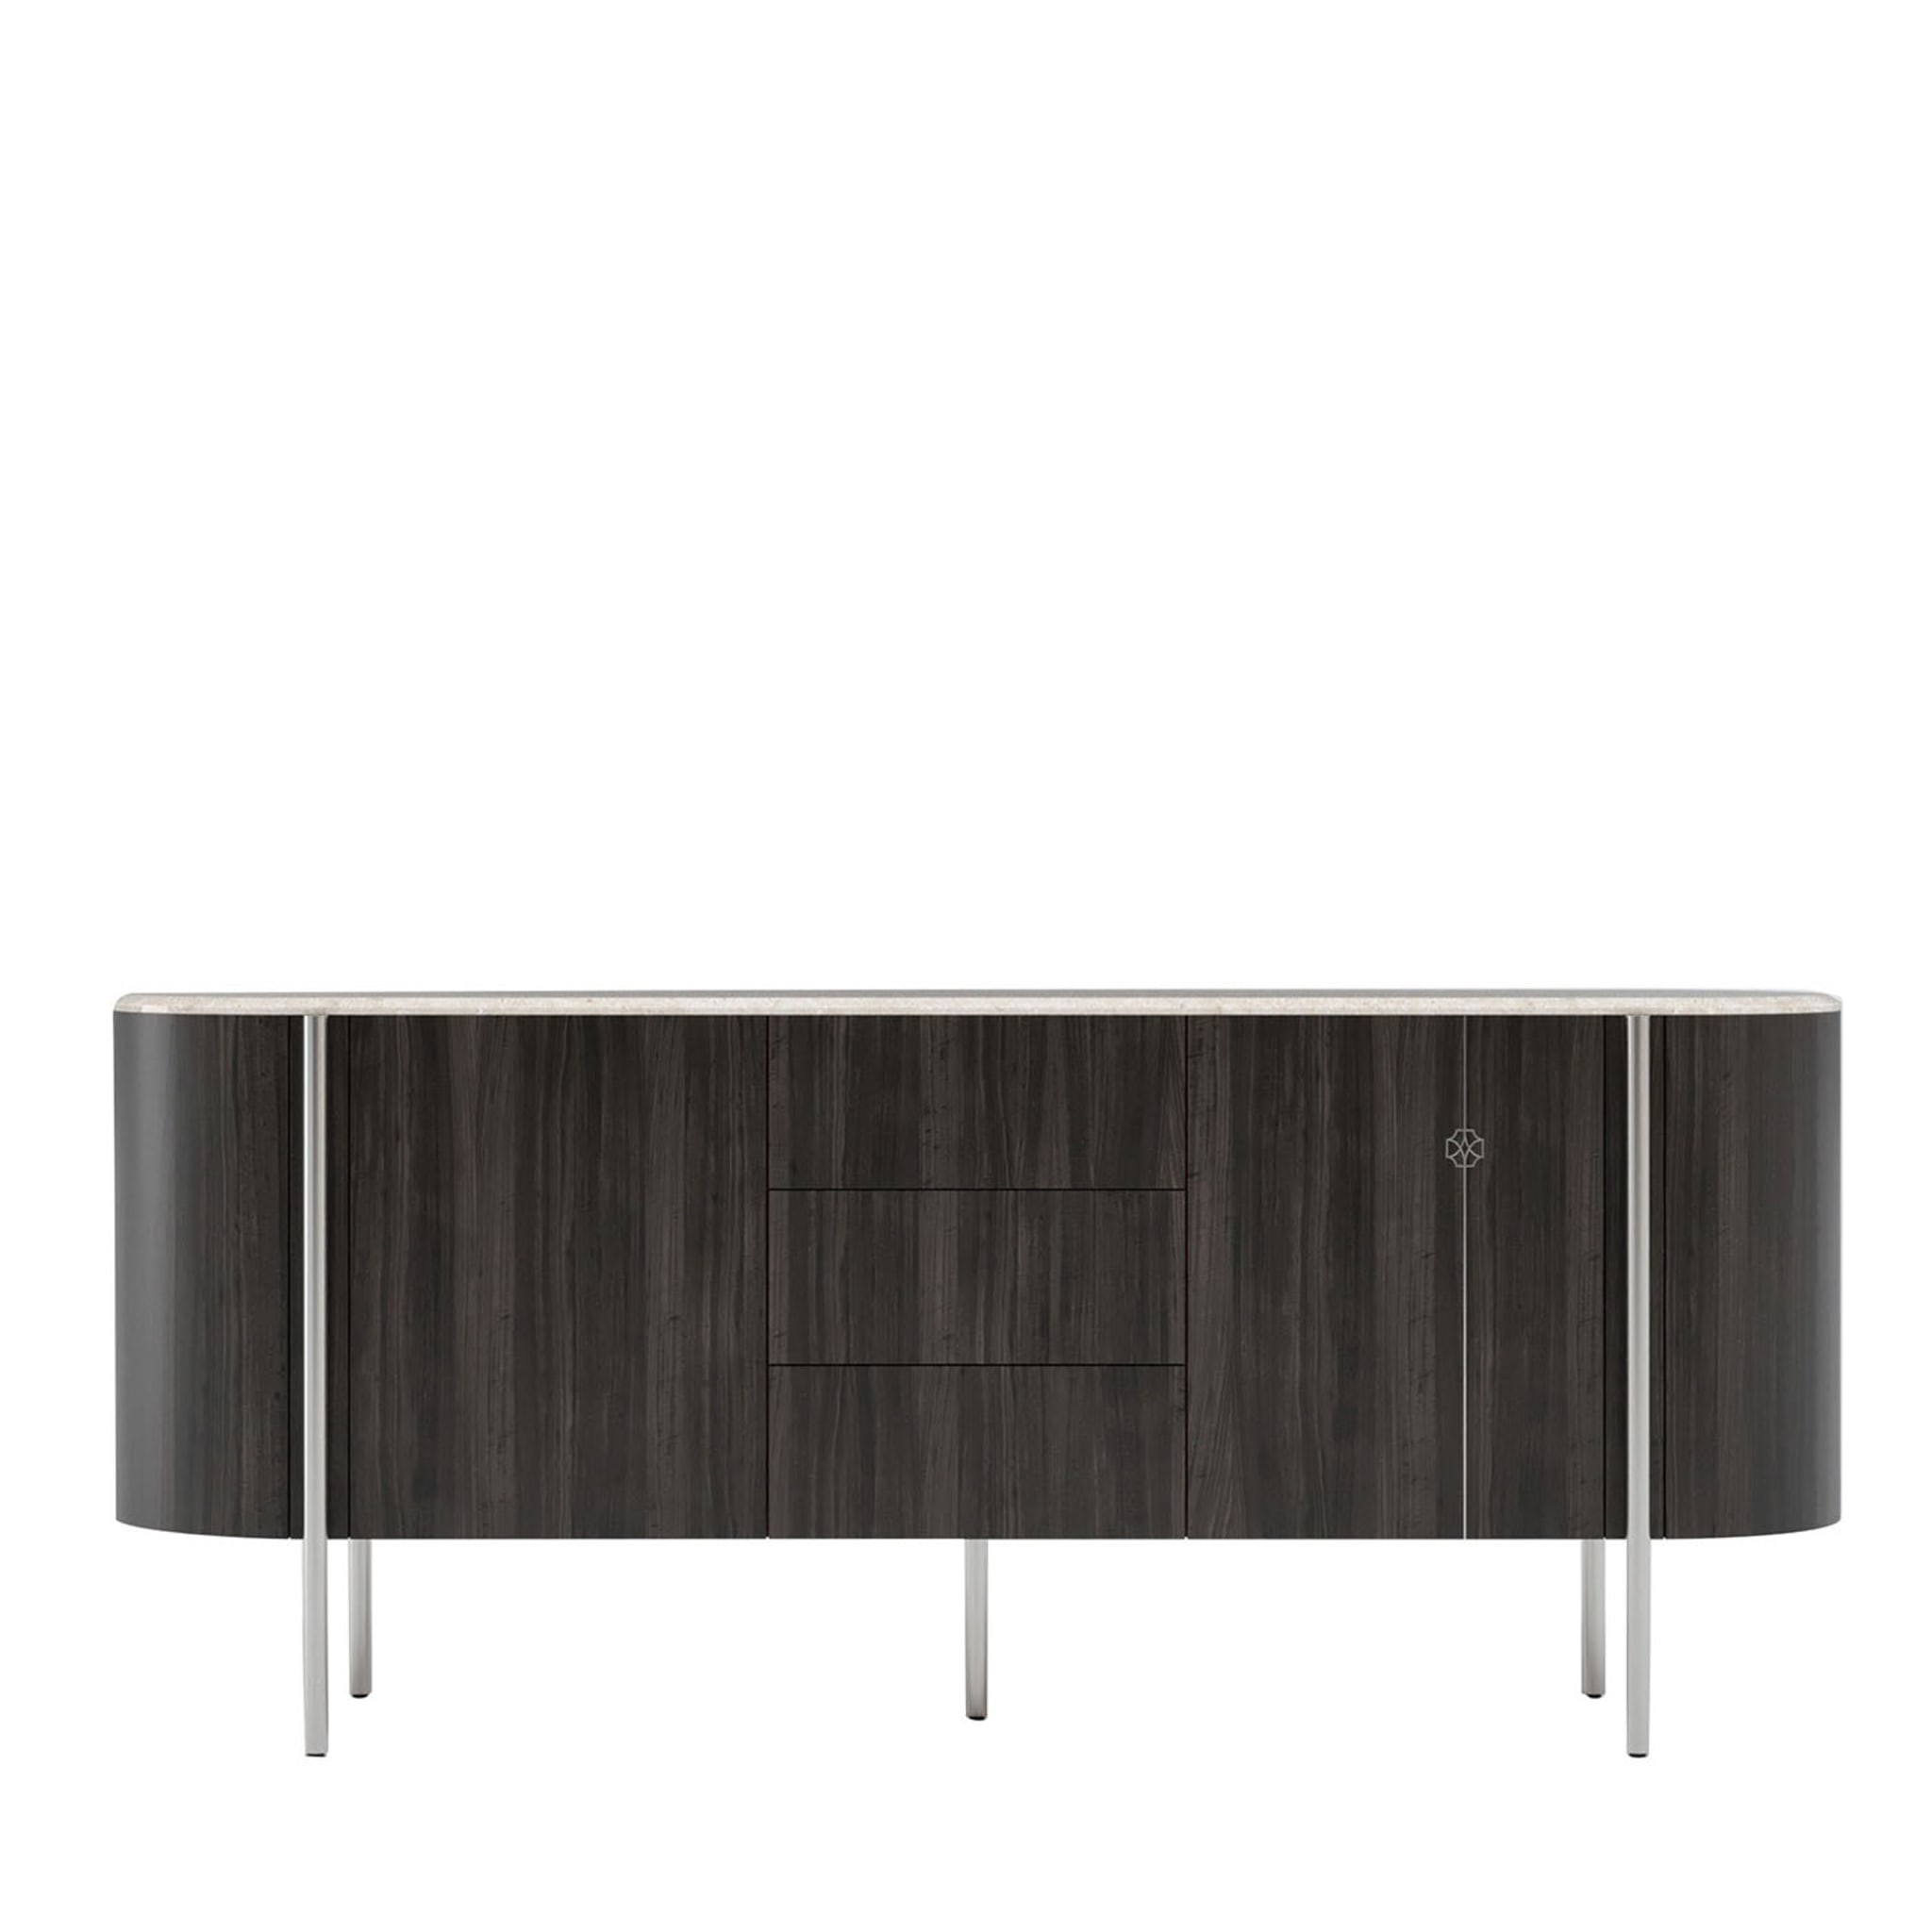 Mia 4-Door Curved Anthracite-Gray Eucalyptus Sideboard - Main view